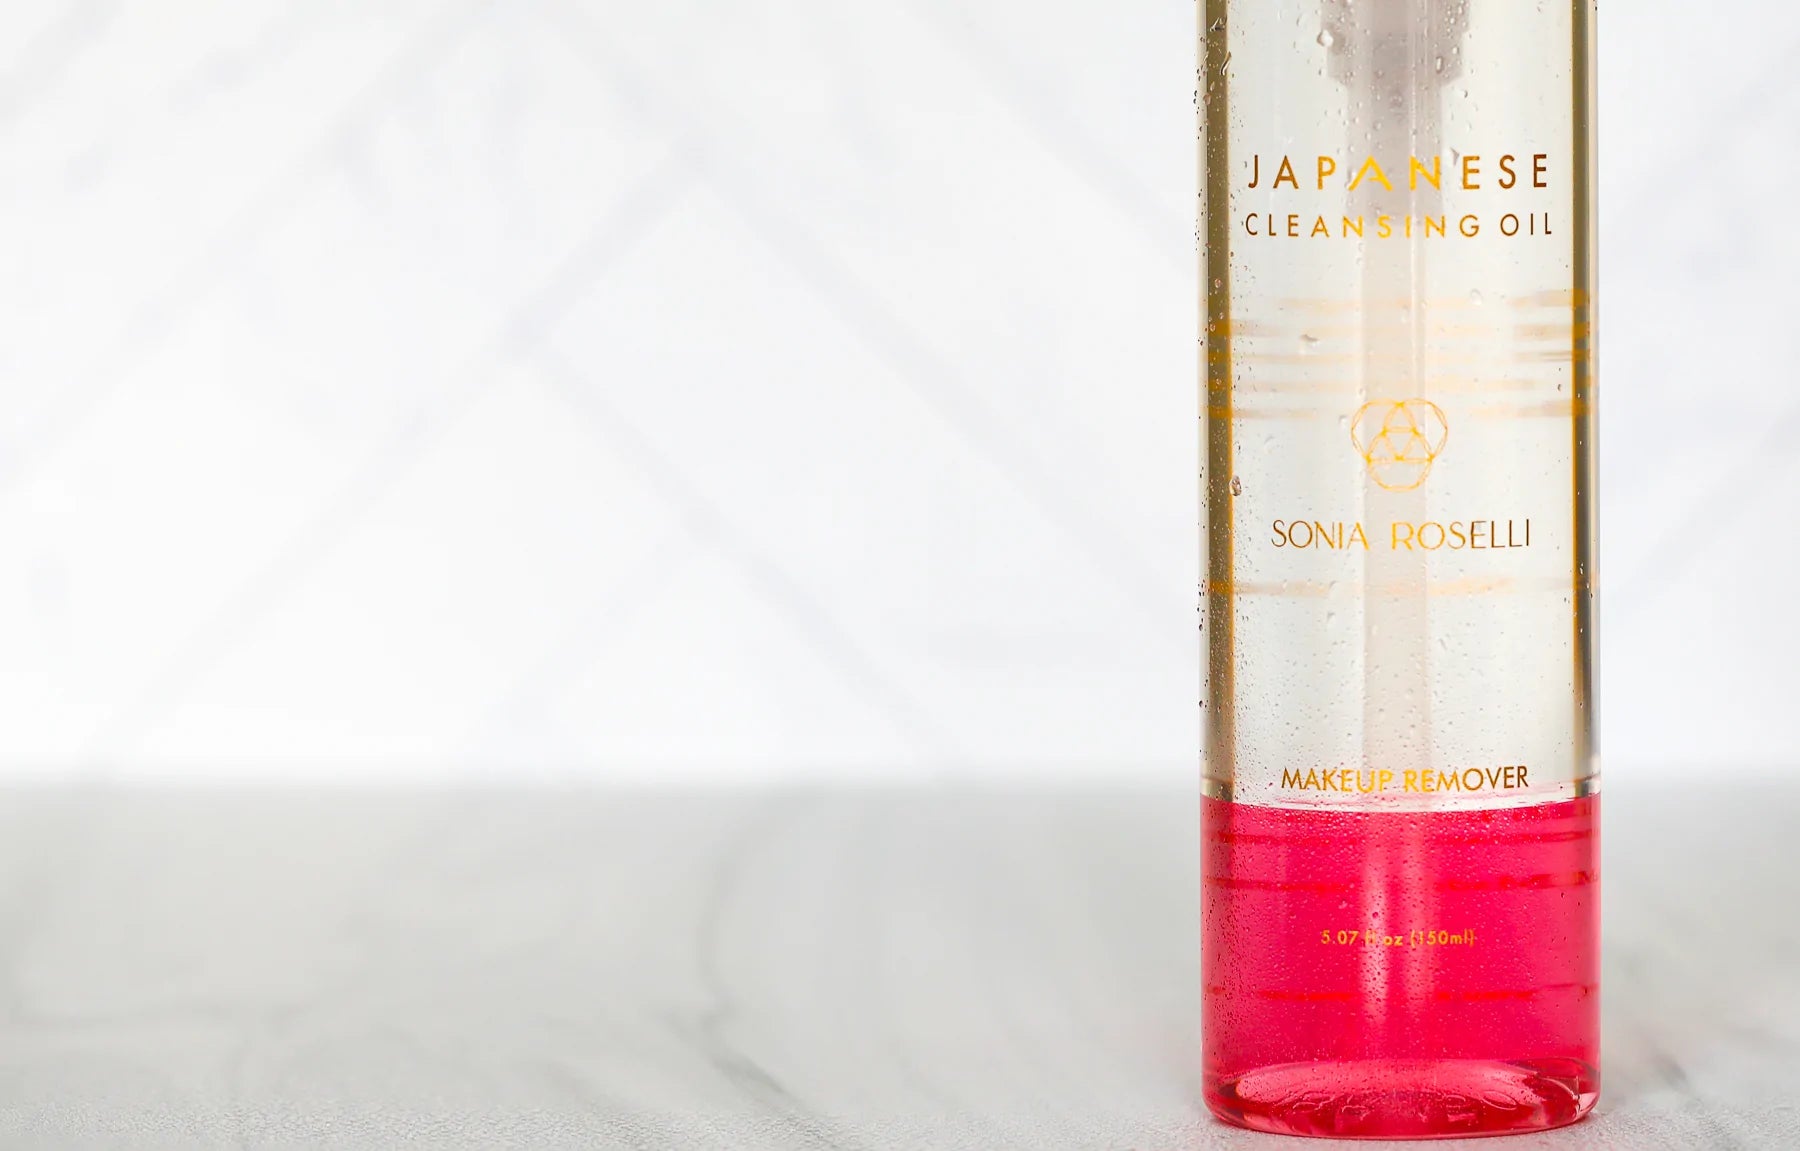 A close up of a bottle of facial cleanser, Japanese Cleansing Oil.